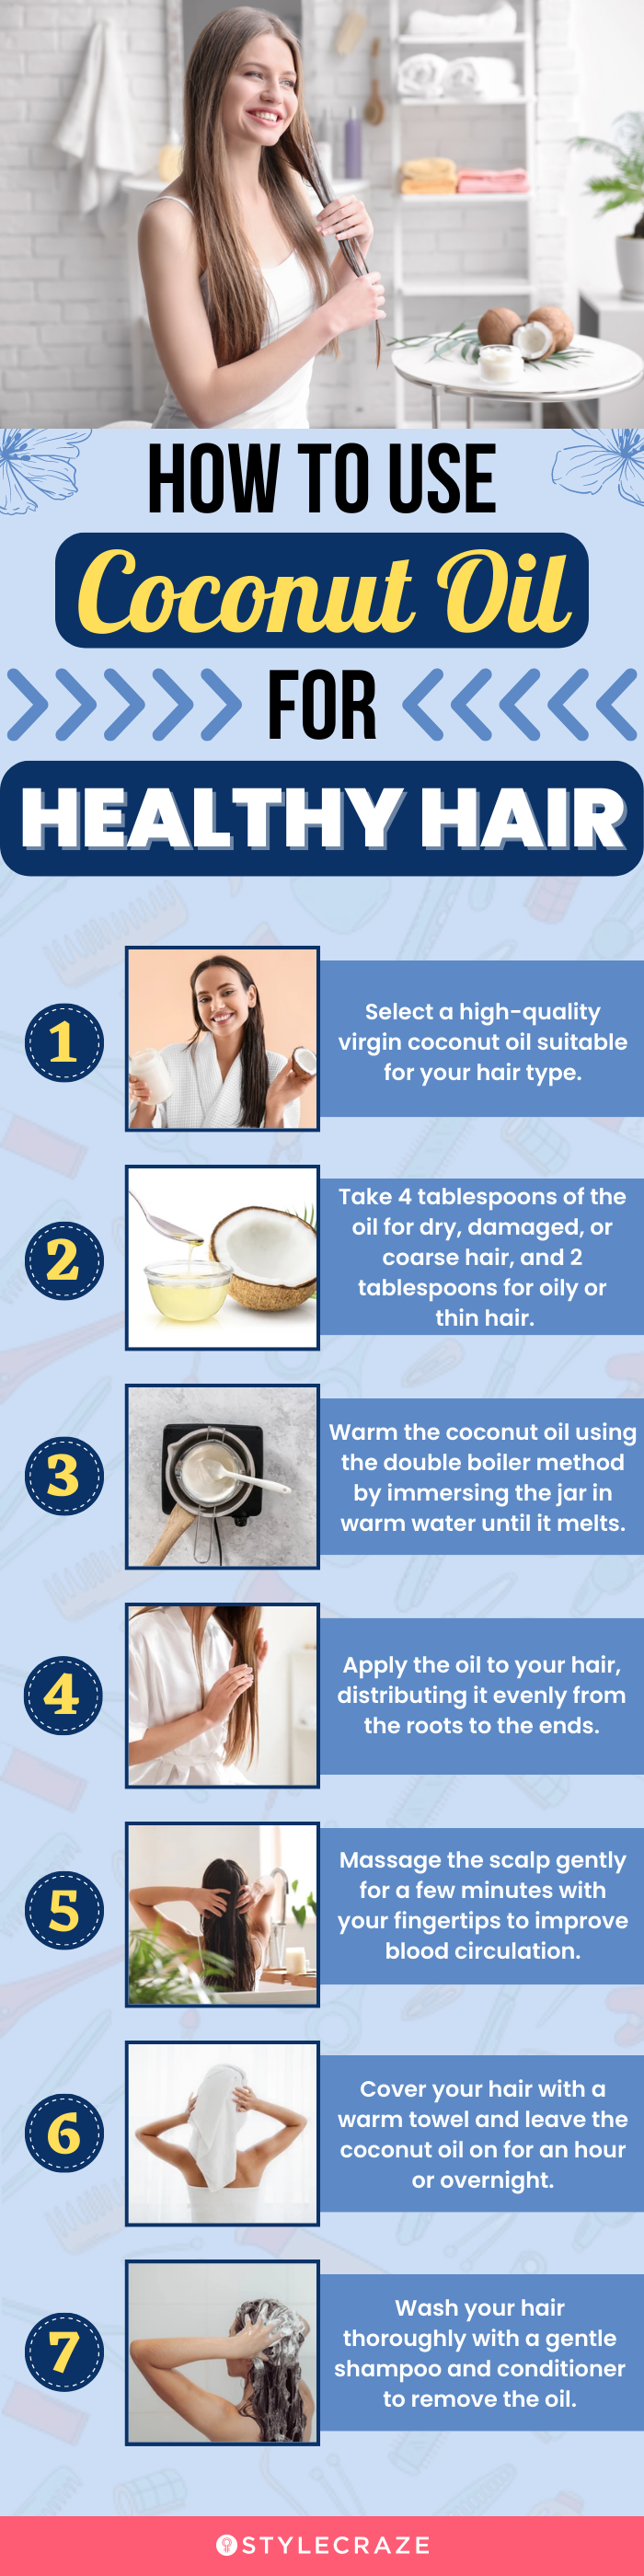  How To Use Coconut Oil For Healthy Hair (infographic)